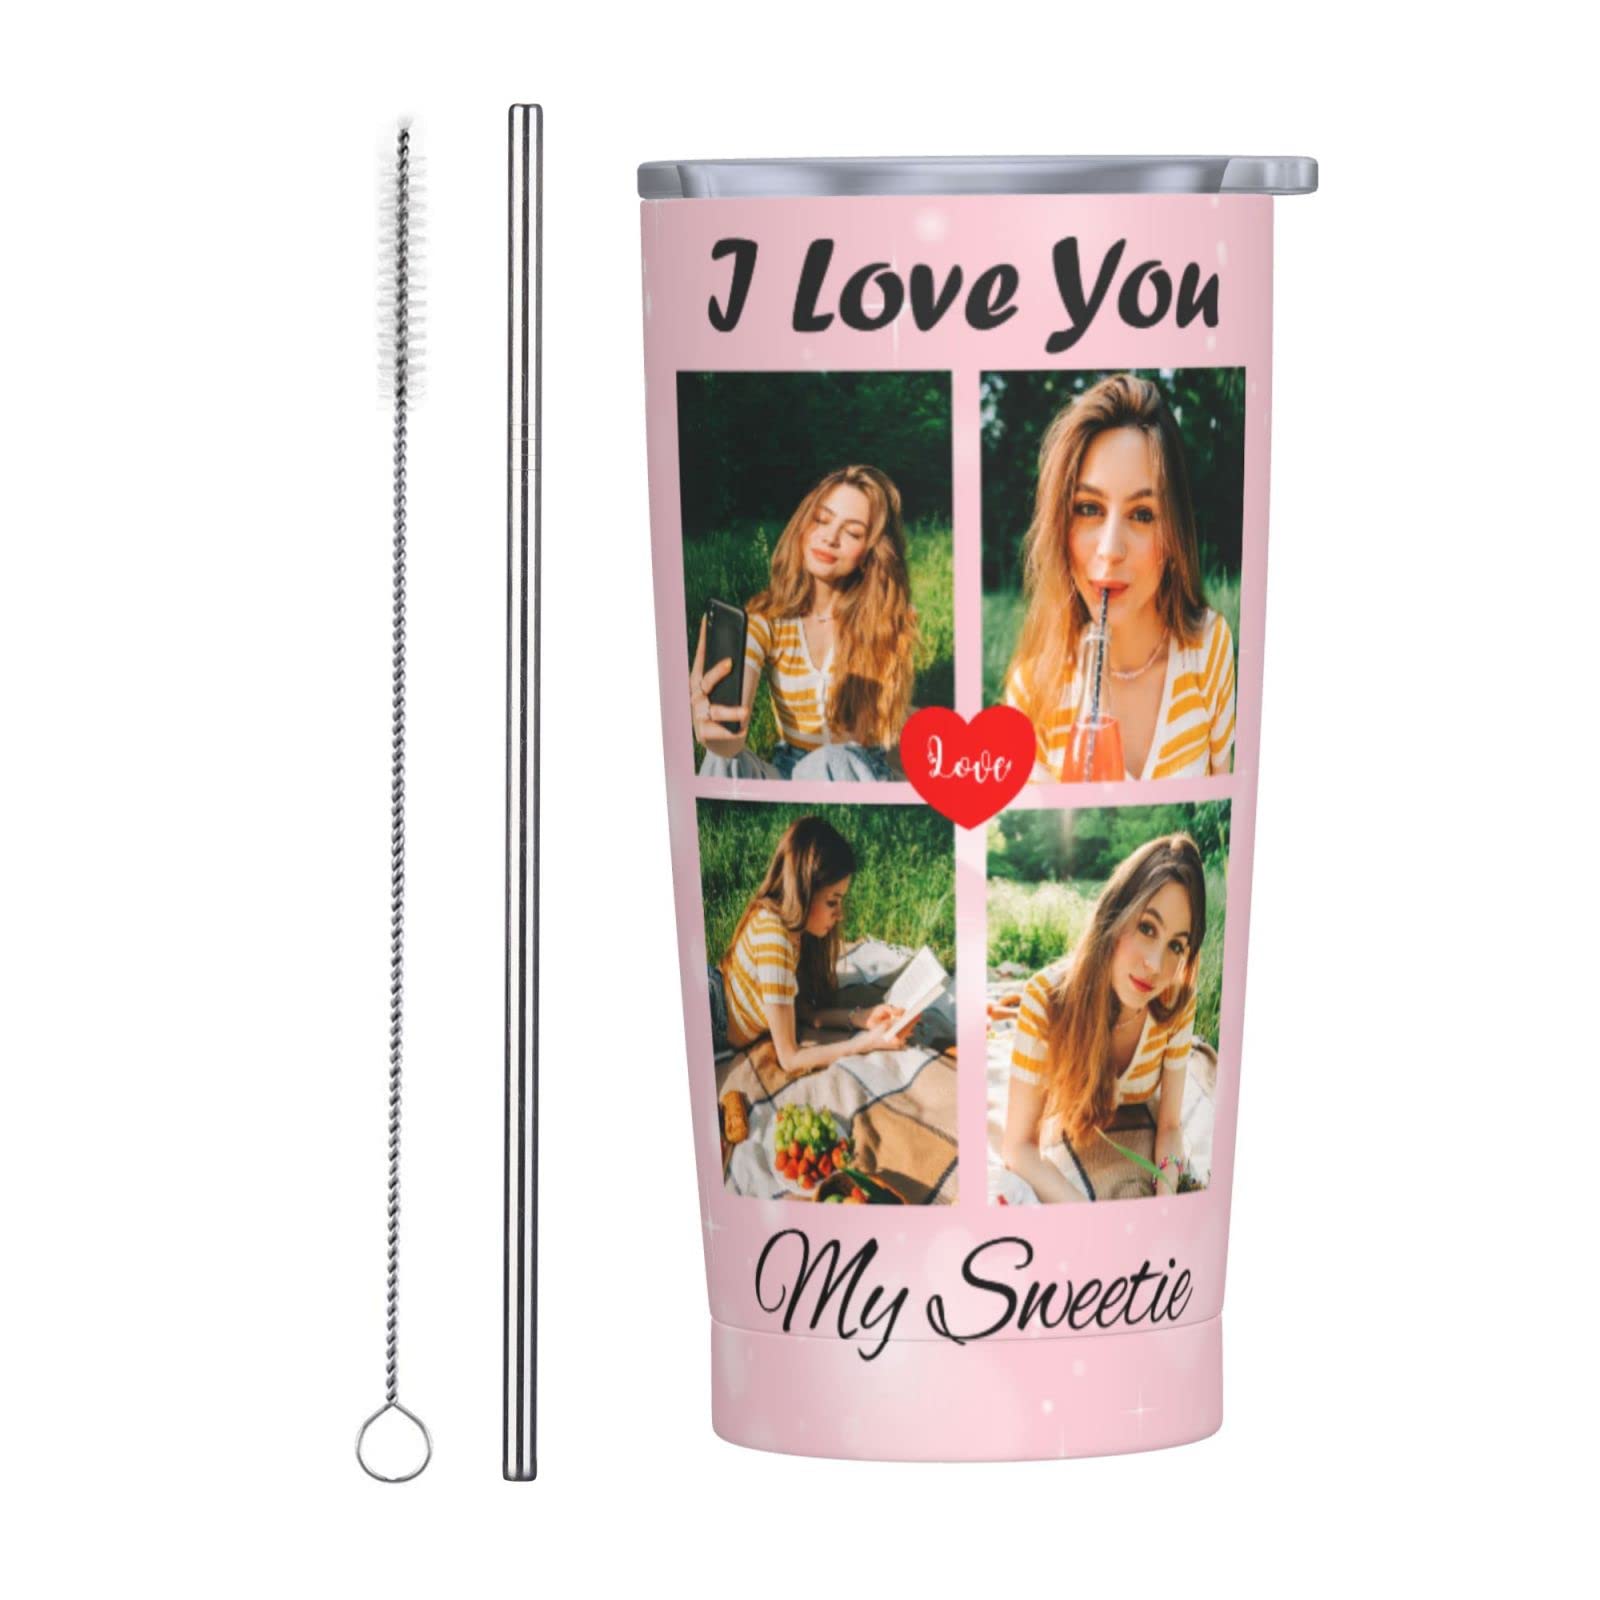 Personalized Tumbler Coffee Mug Custom Mug Cups with Picture Photo Lid and Straw 20oz Customized Mothers Day Birthday Gifts for Men Women Mom Dad